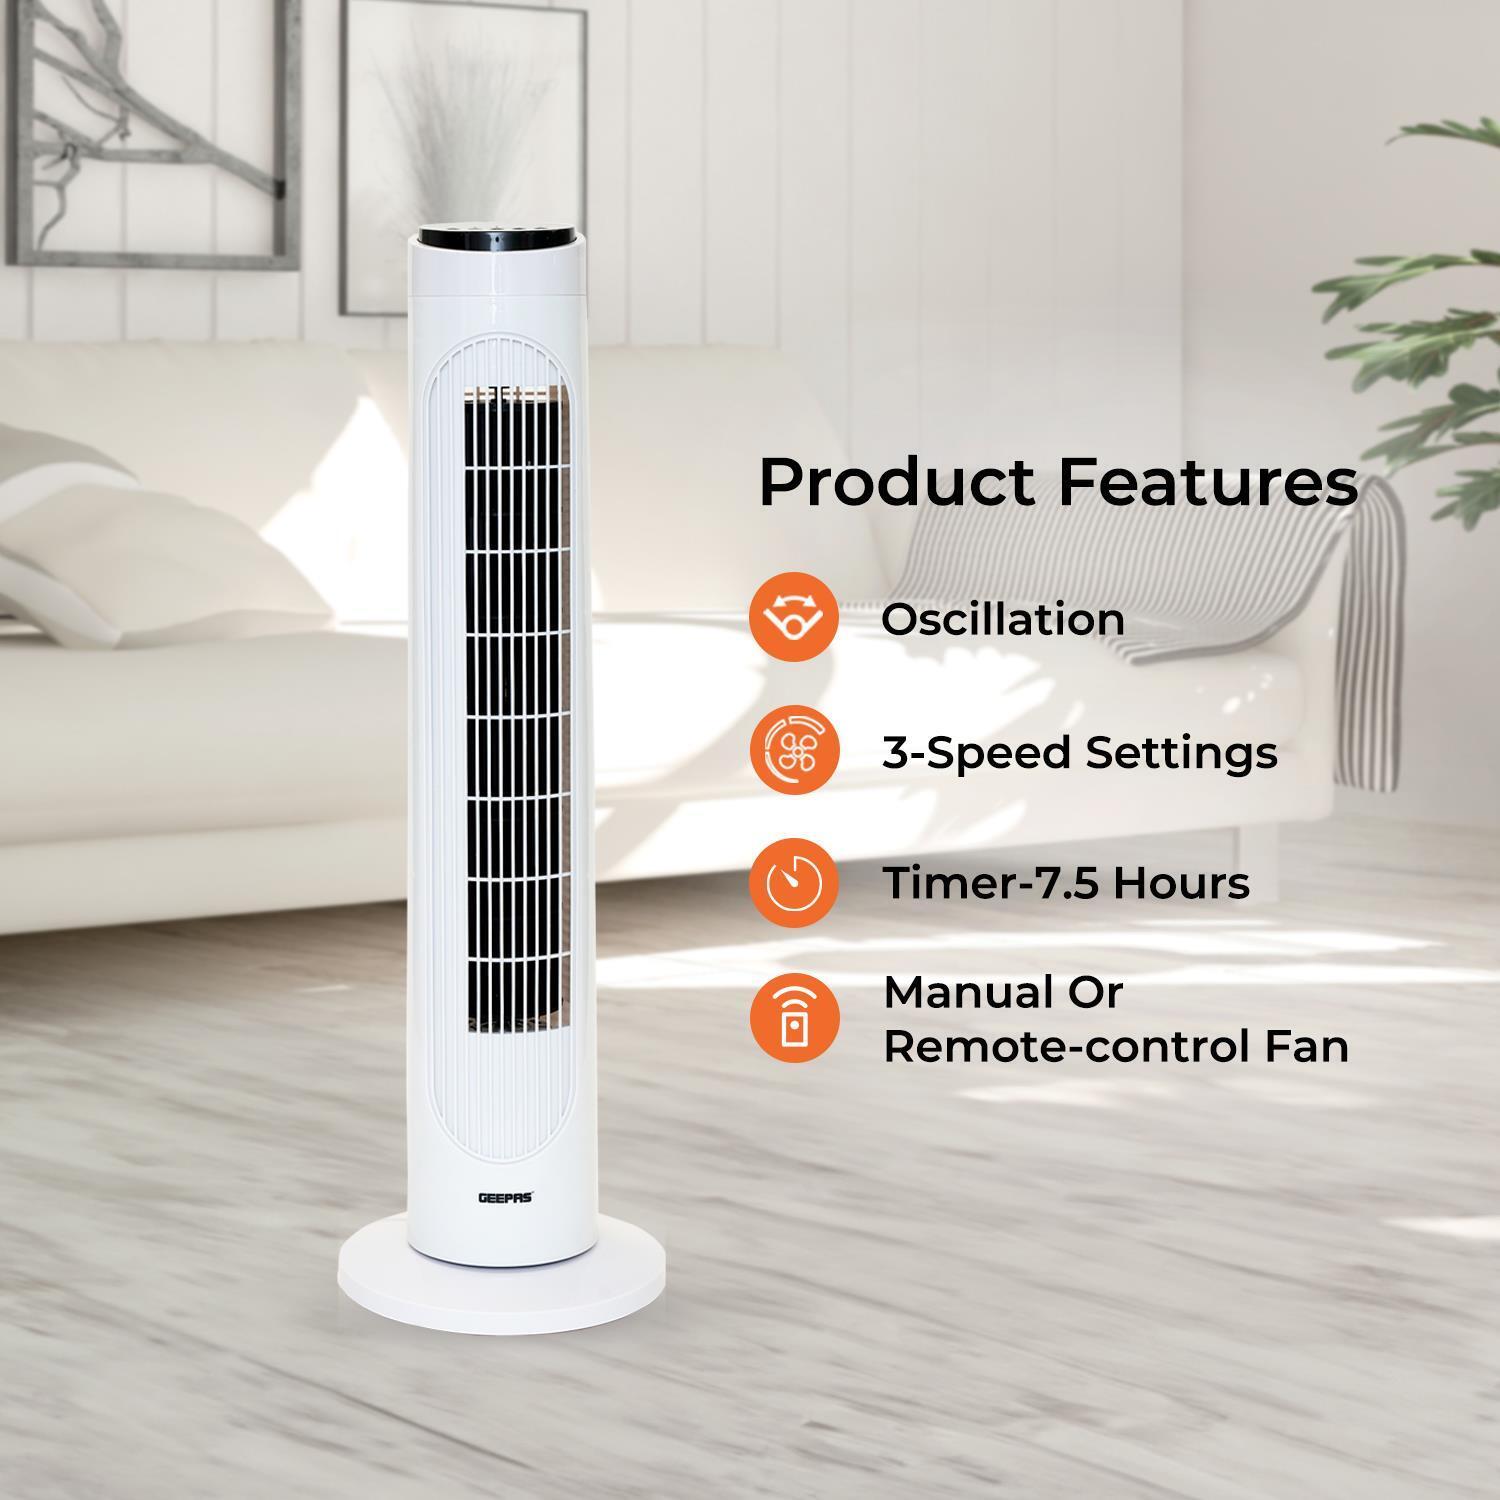 Showing off the main product features of the 29 inch tower fan, with the main features being oscillation, 3-speed settings, 7.5 hour timer and manual or remote controlled operation.